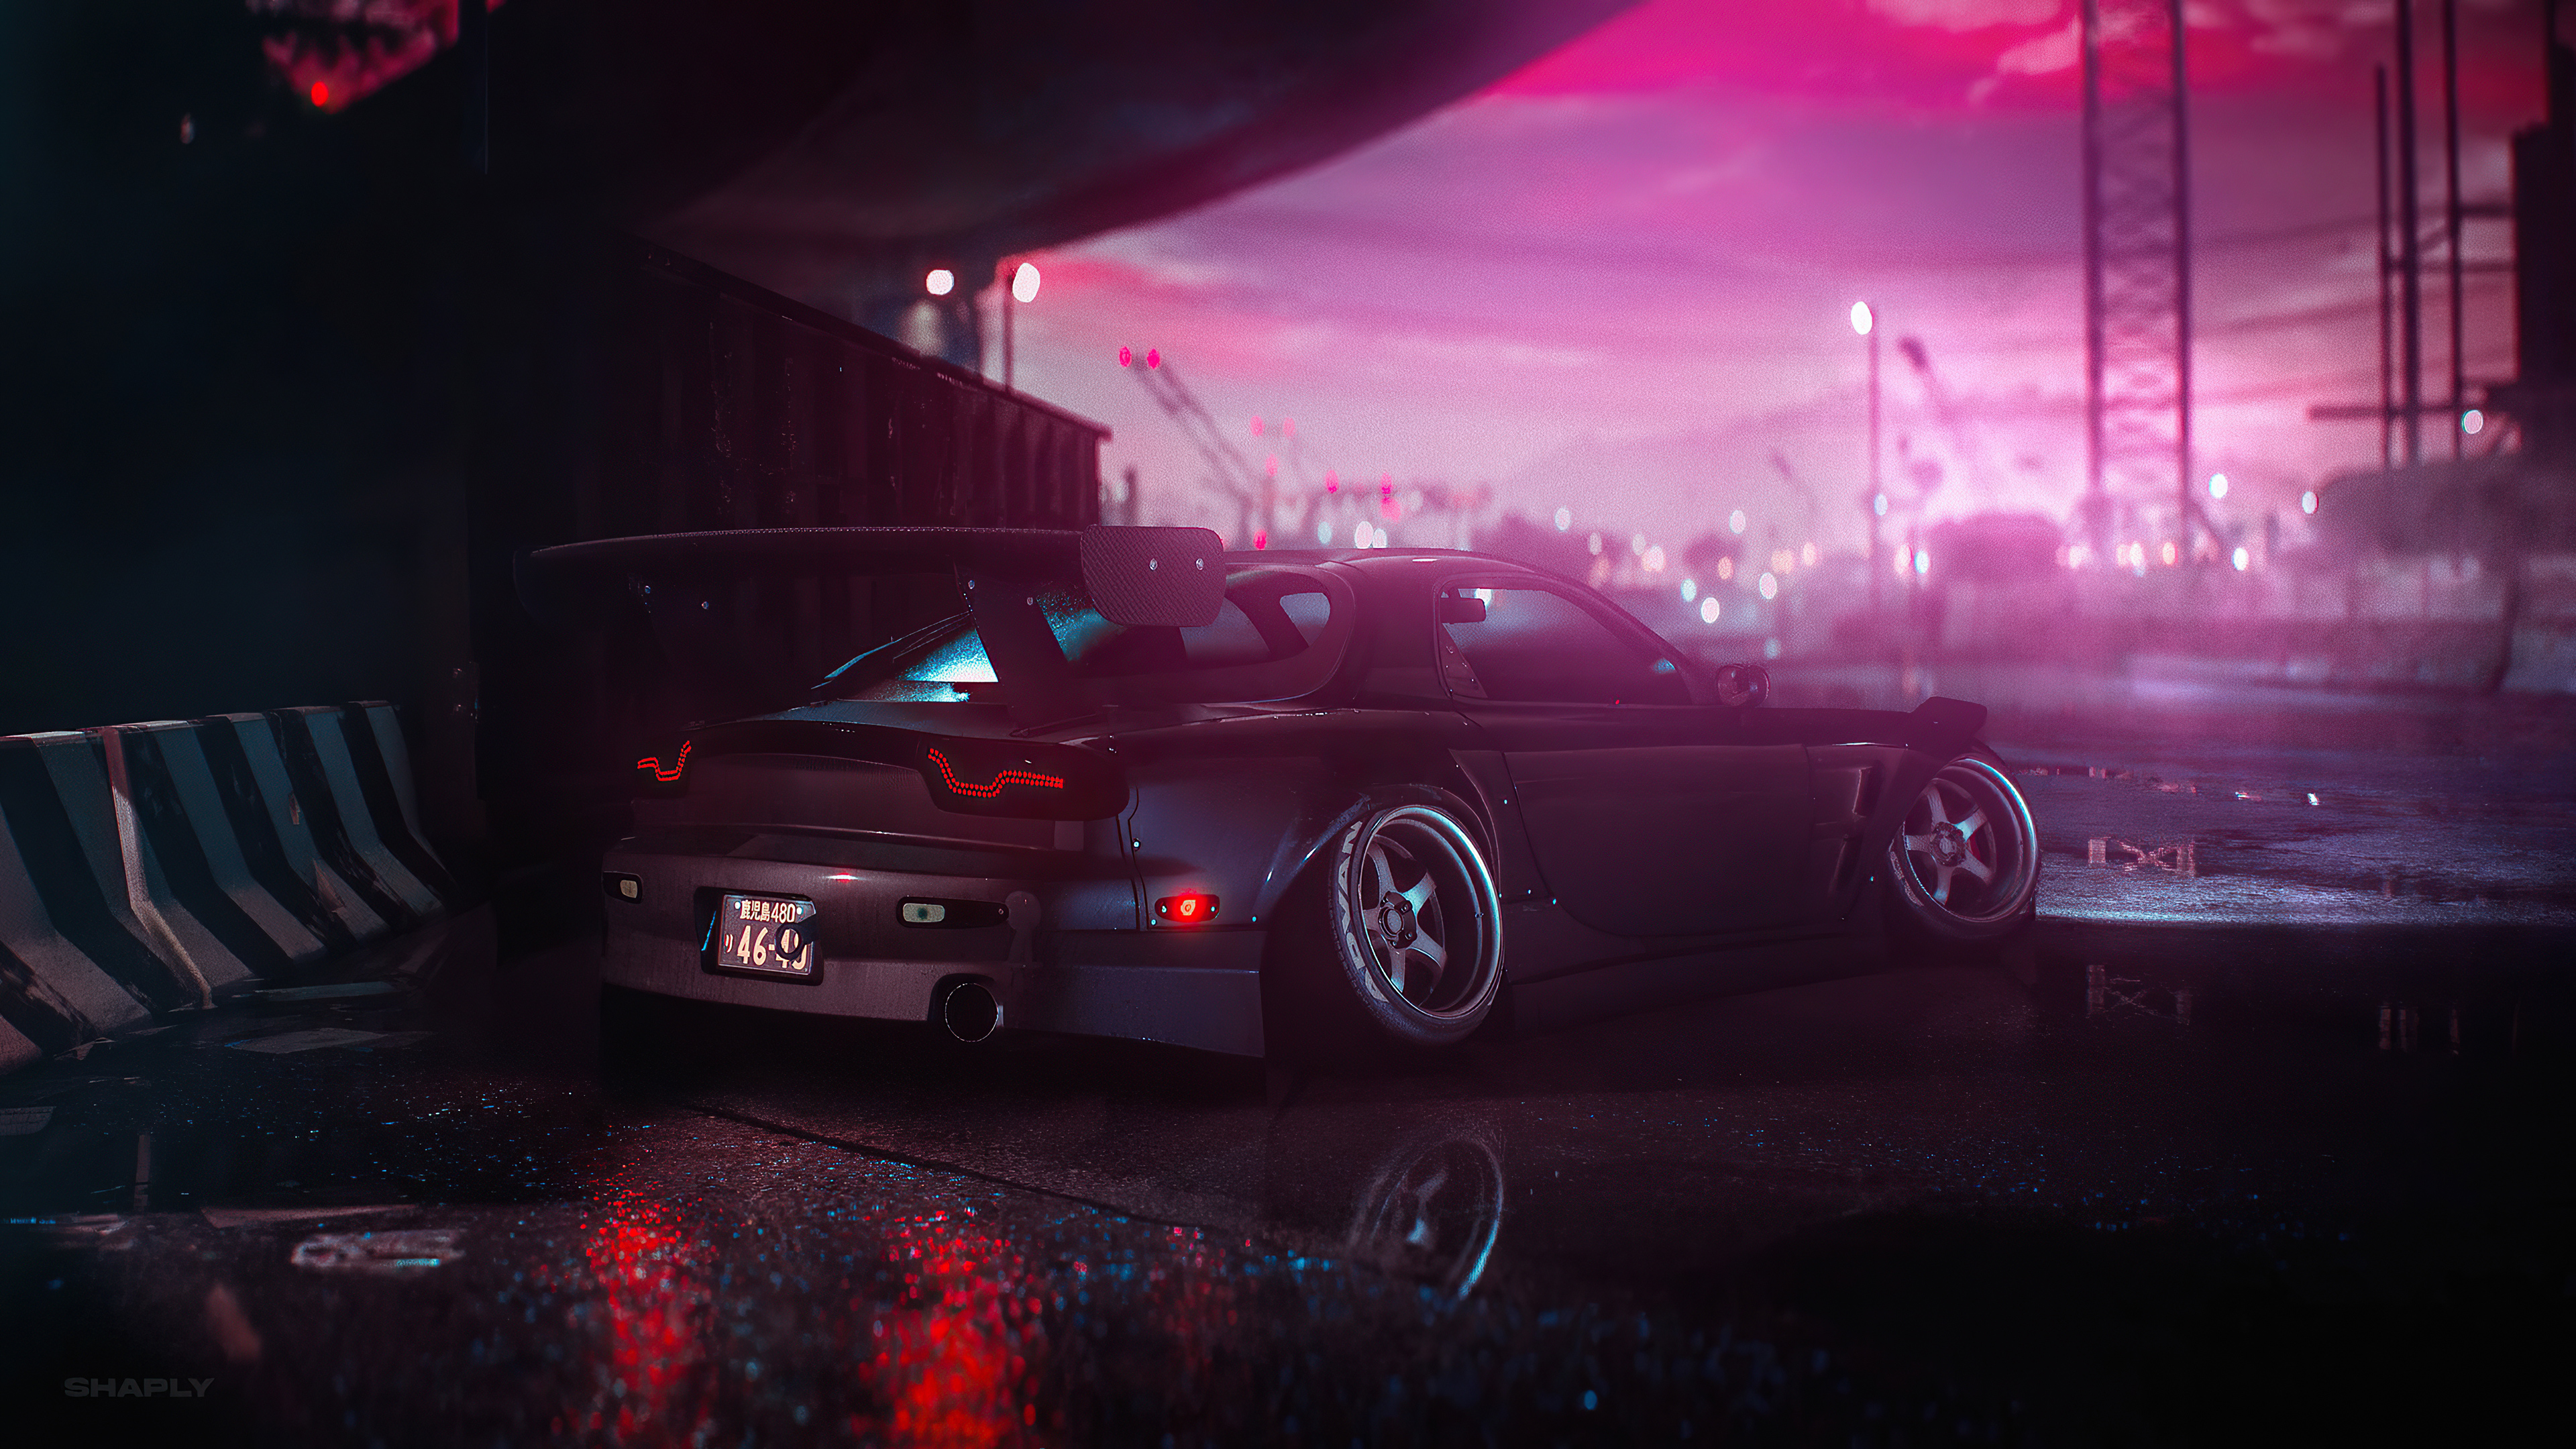 Free photo Mazda mx5 in Need for Speed